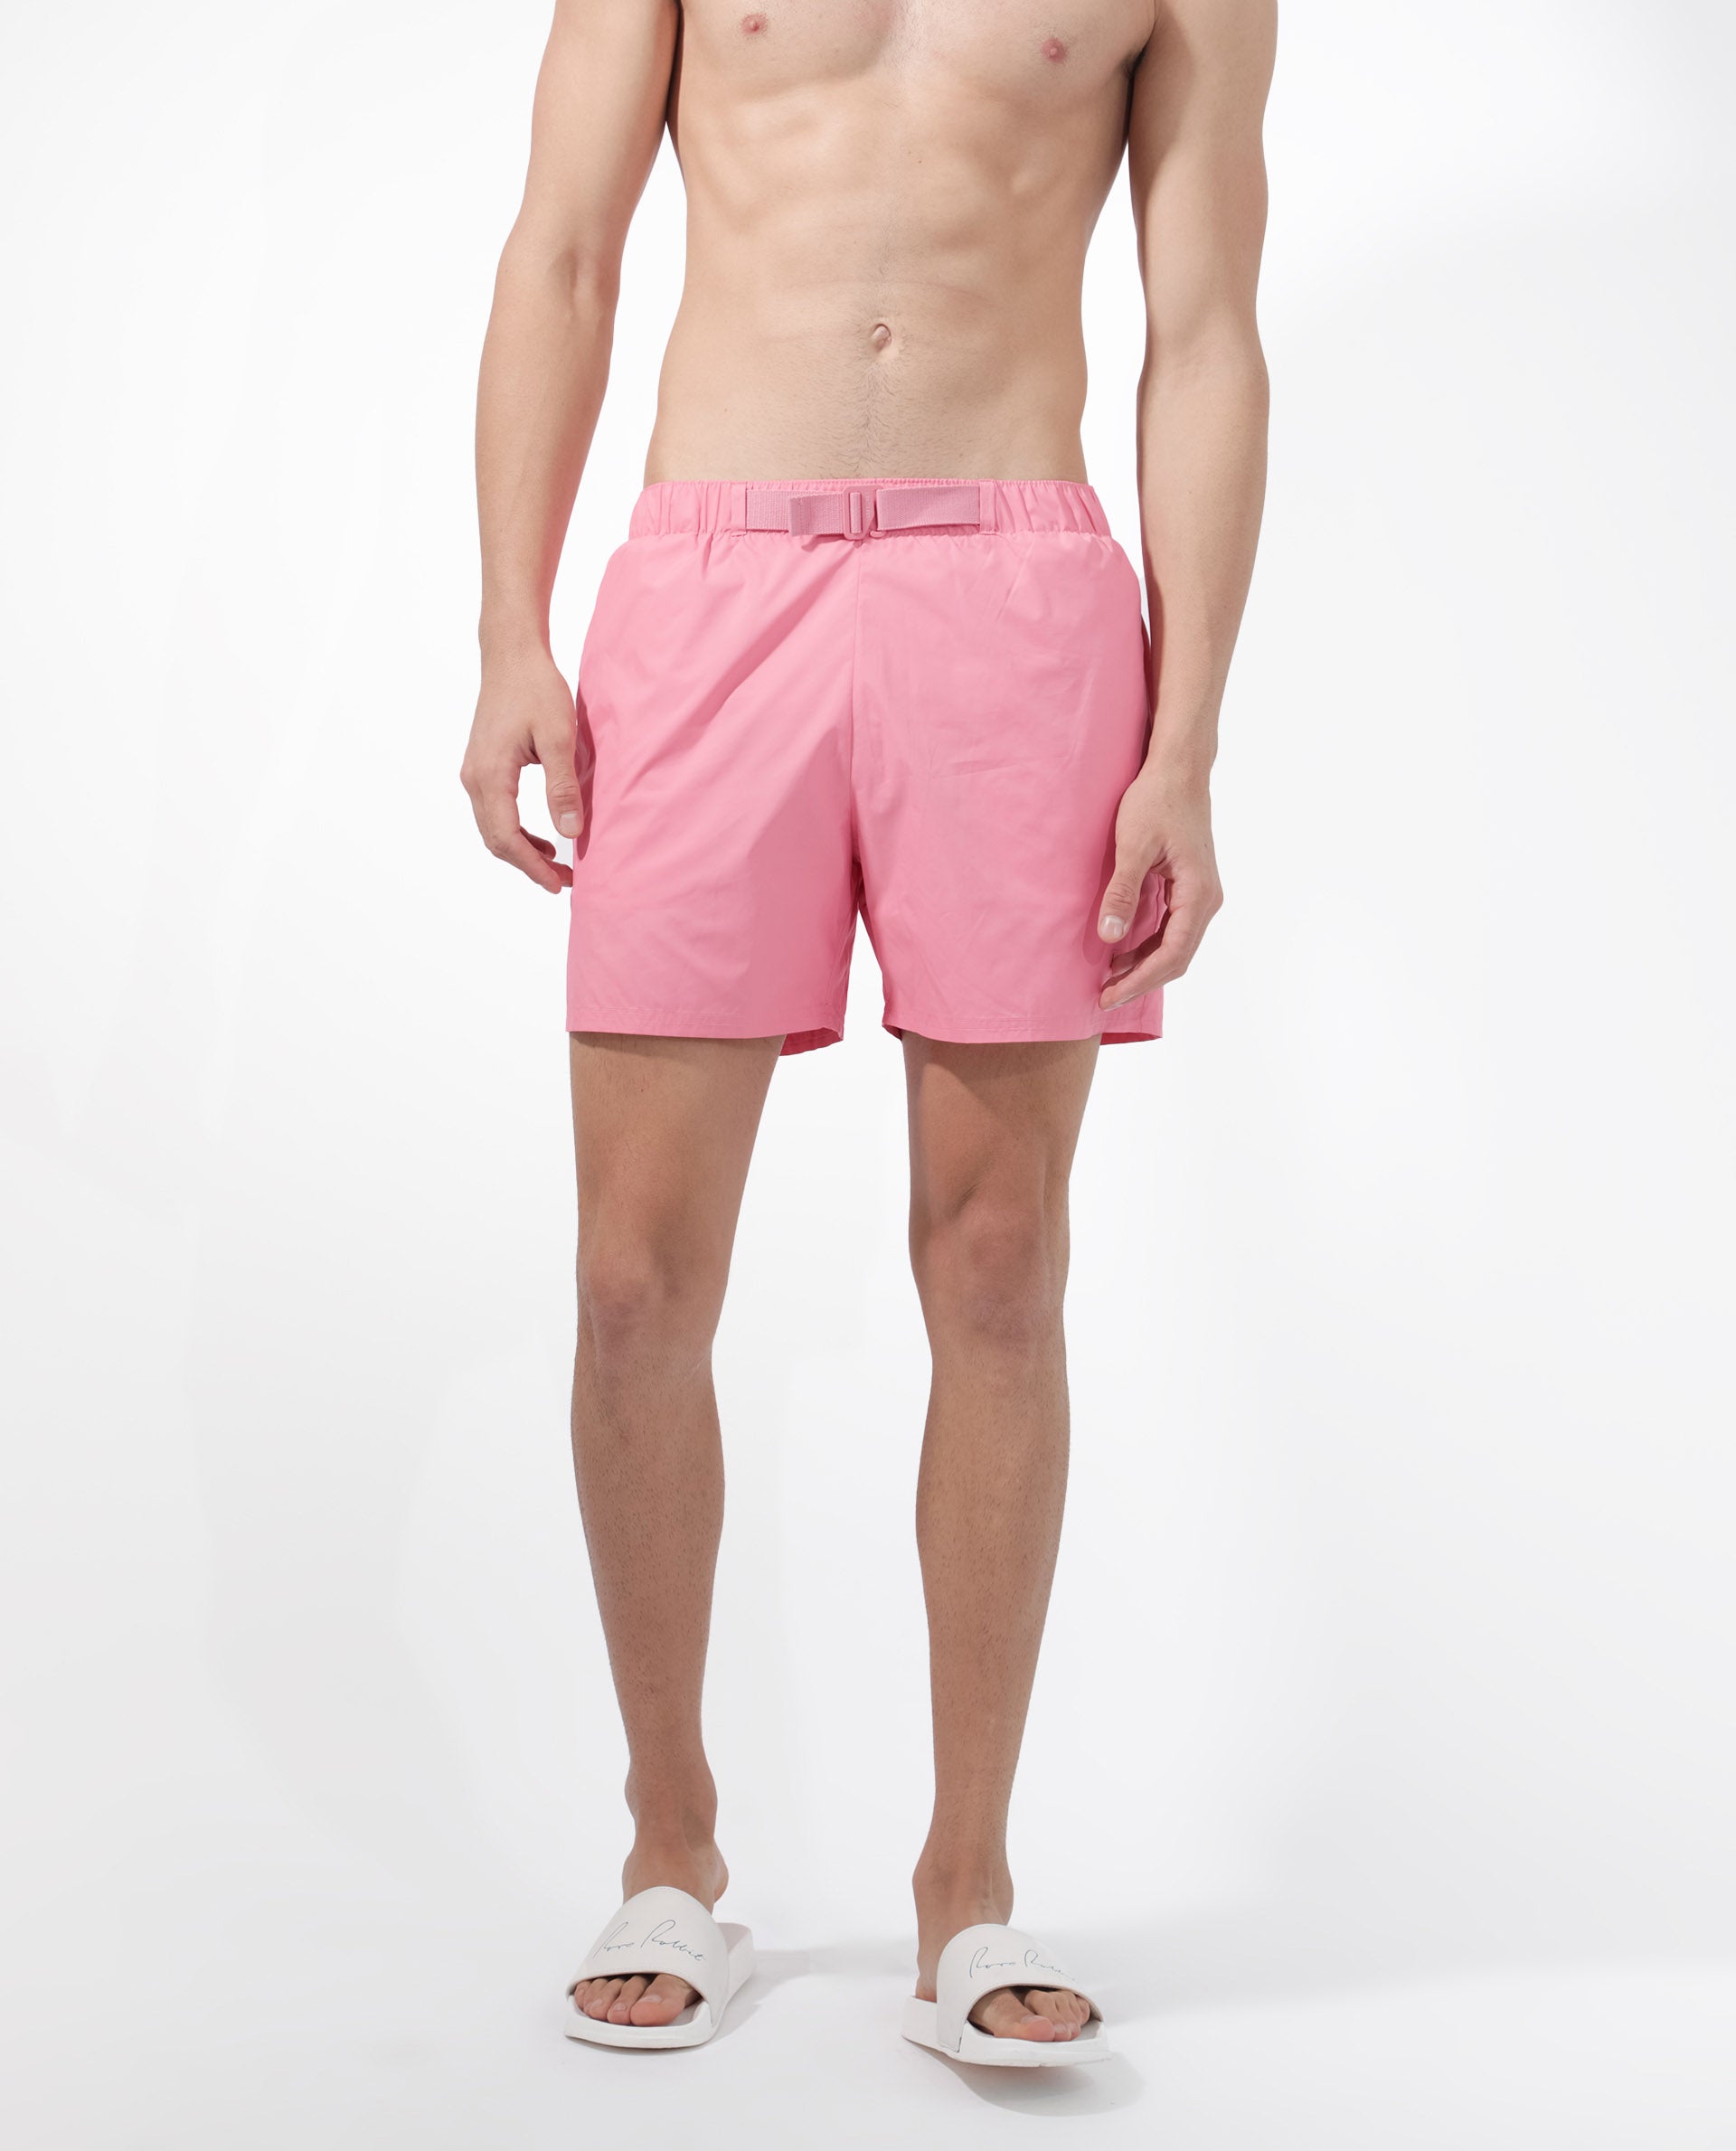 Pastel shorts from Pacific sun